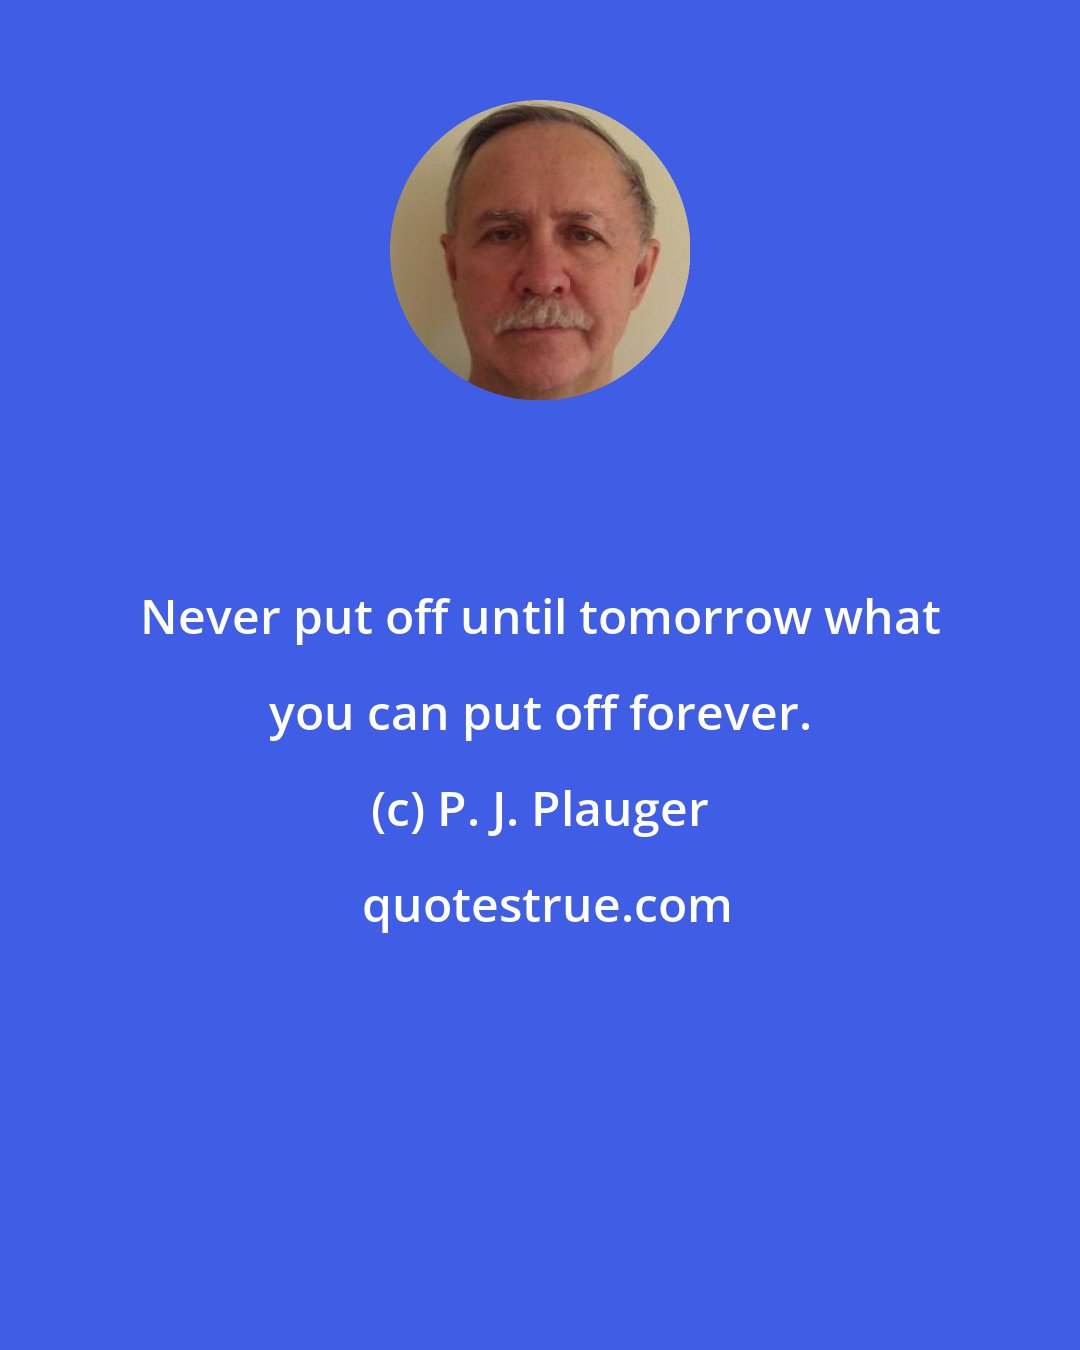 P. J. Plauger: Never put off until tomorrow what you can put off forever.